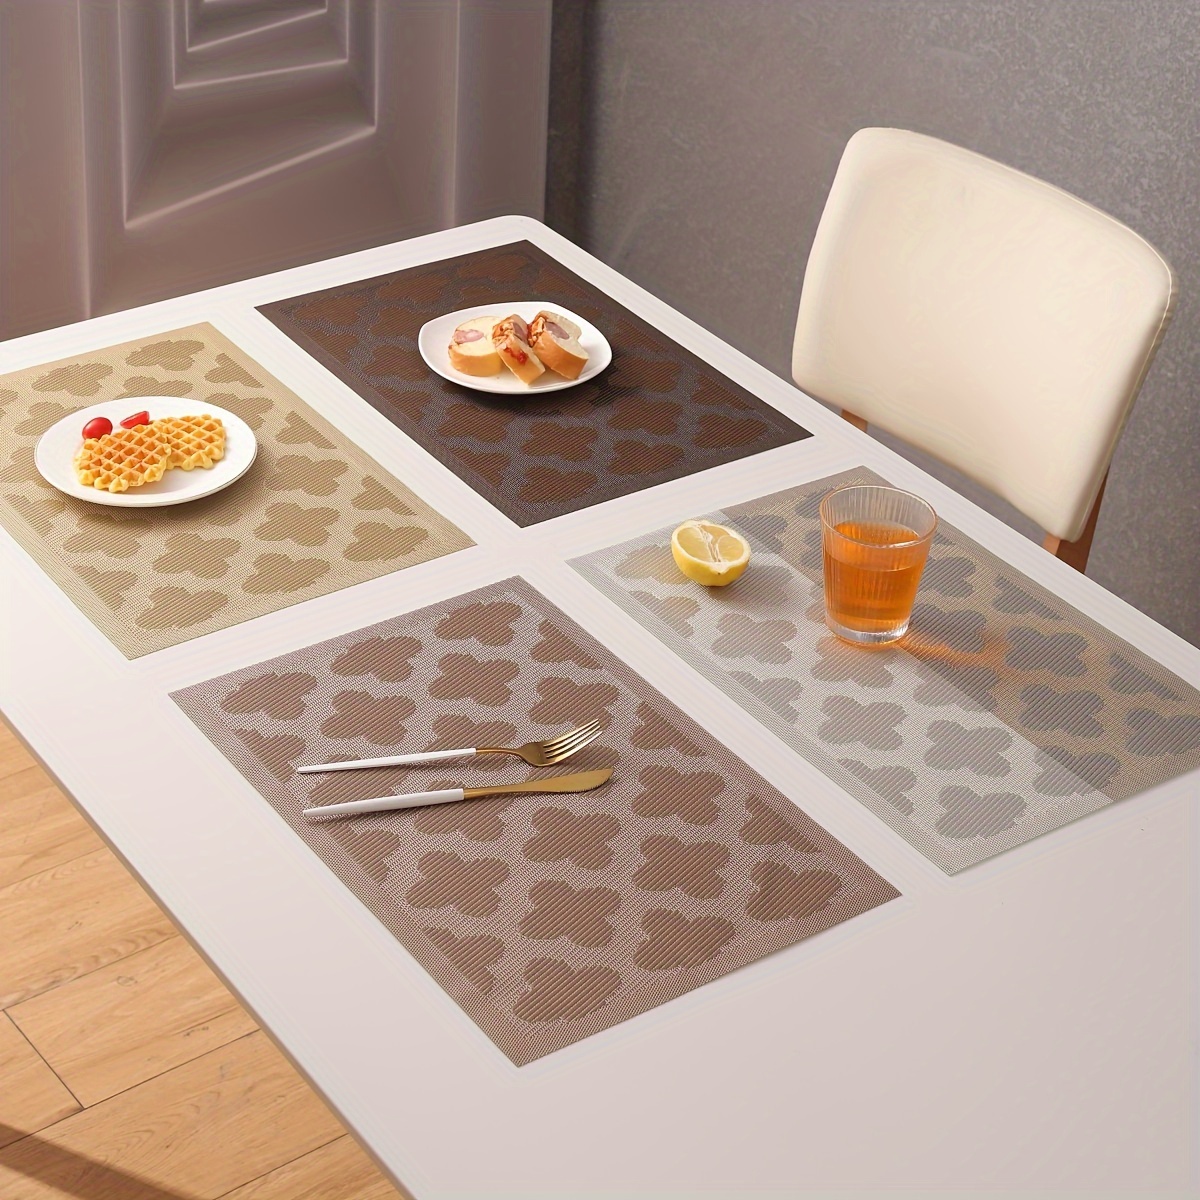 PVC Placemats For Dining Table,Washable Non-Slip Heat Resistant Kitchen Table  Mats,Tableware Decor for Home Table